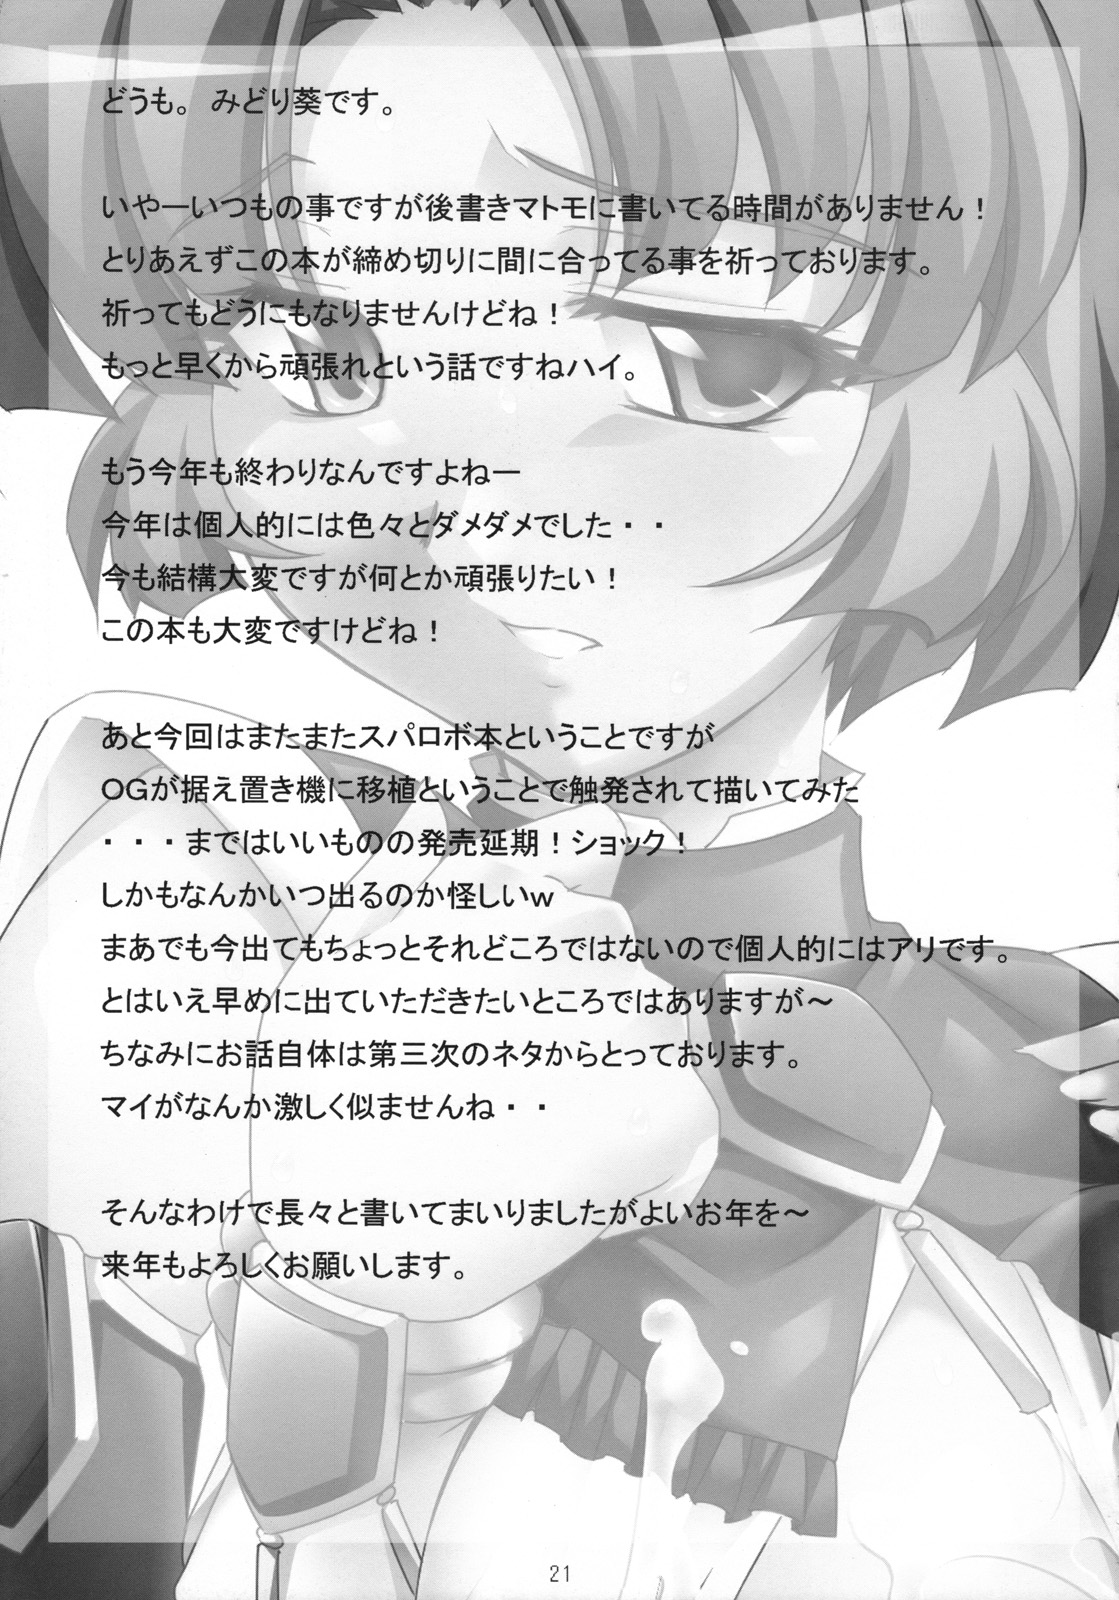 (C71) [NF121 (Midori Aoi)] CHEMICAL SOUP (Super Robot Wars) page 20 full